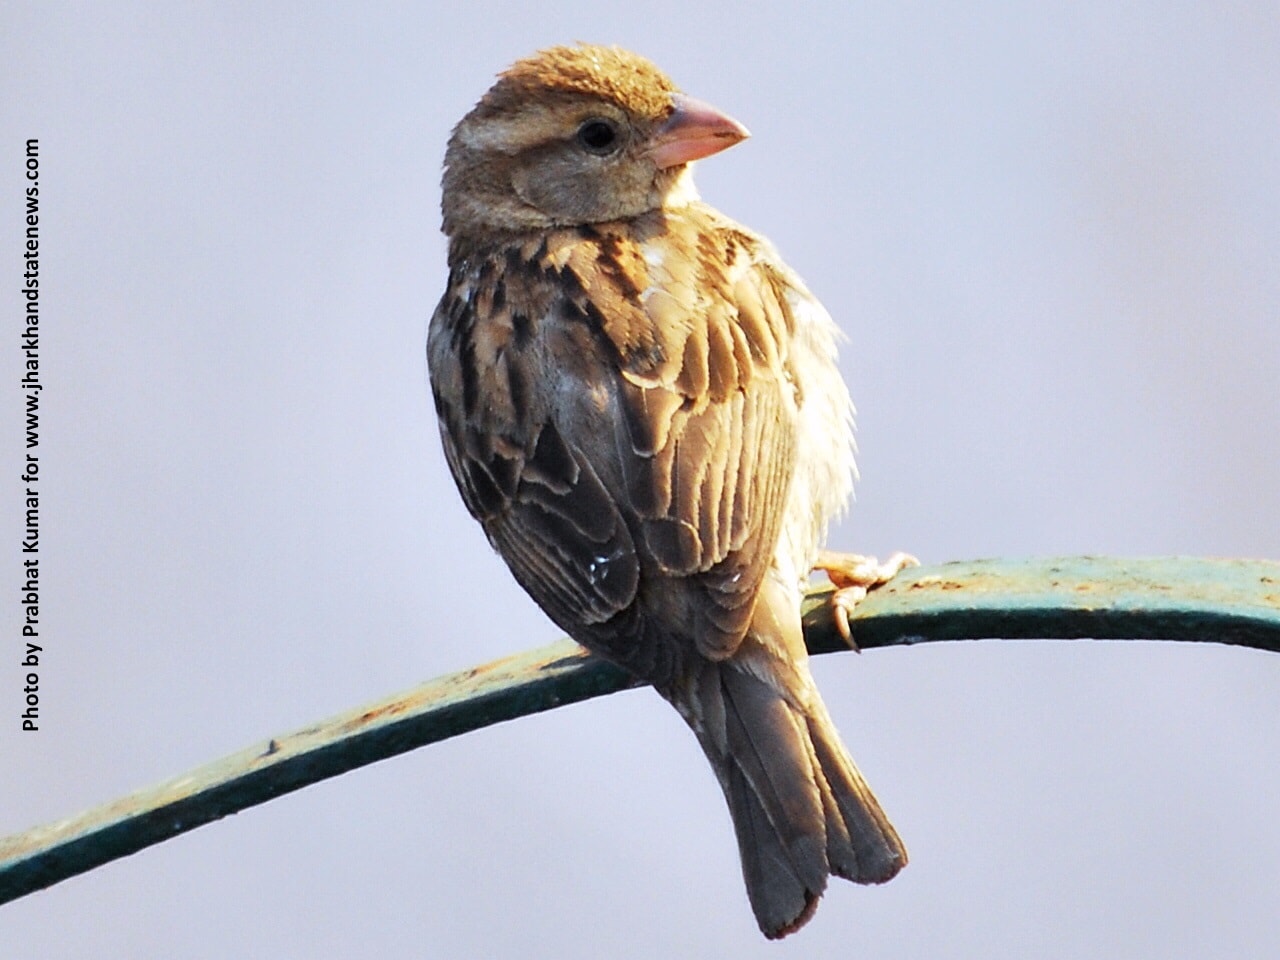 Sparrows think,express emotions;Humans make them live on verge of extinction